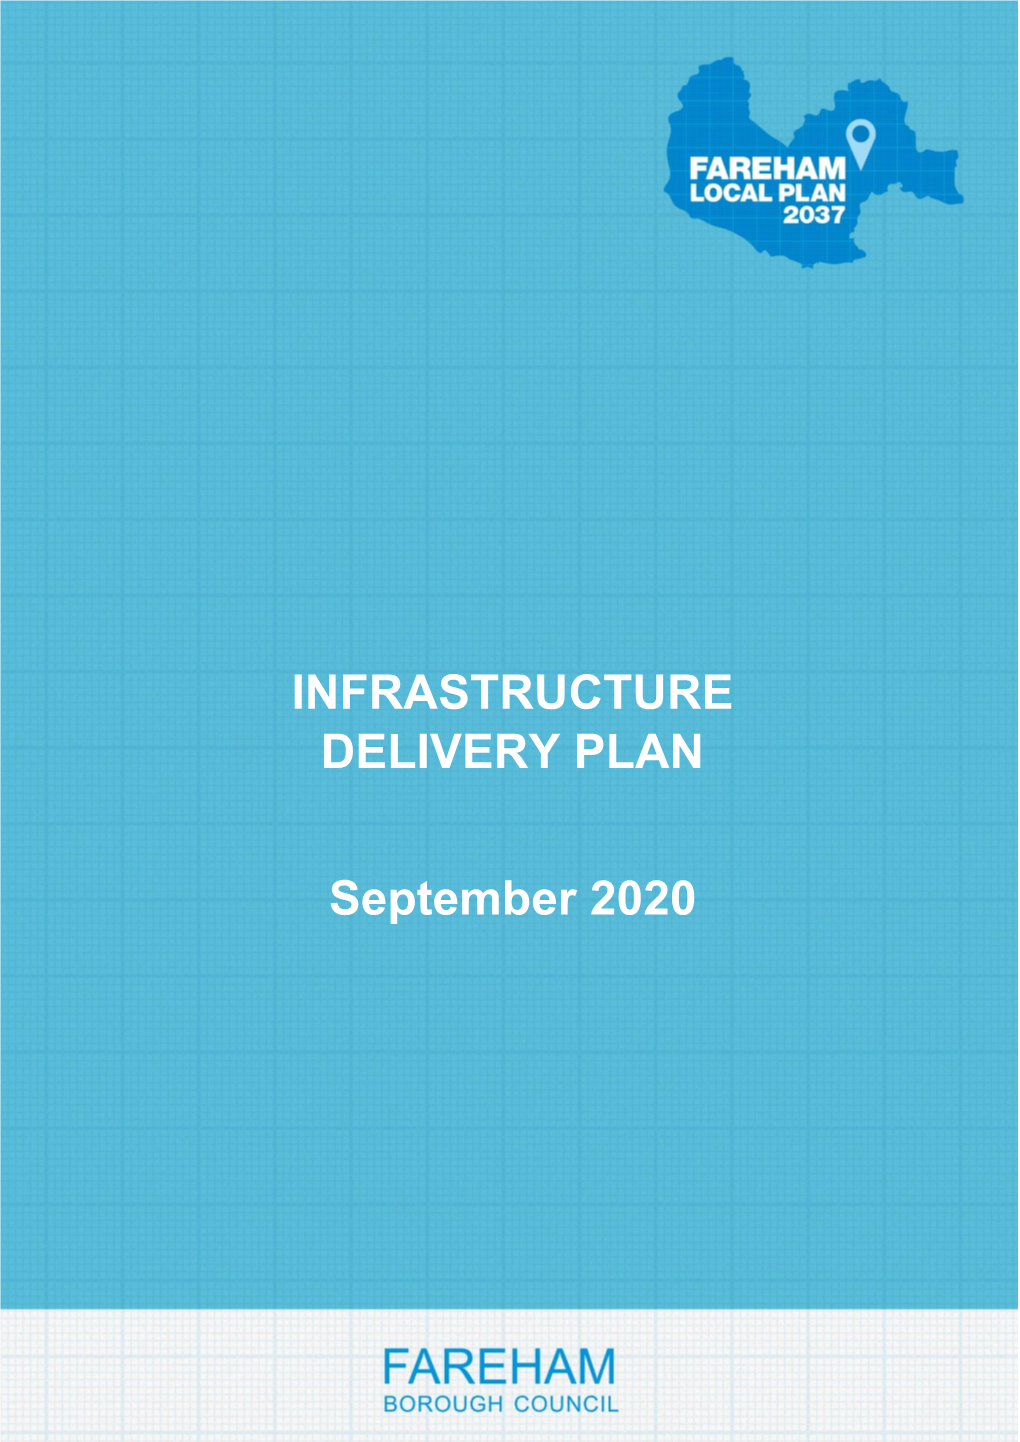 Local Plan 2037 Infrastructure Delivery Plan 2020